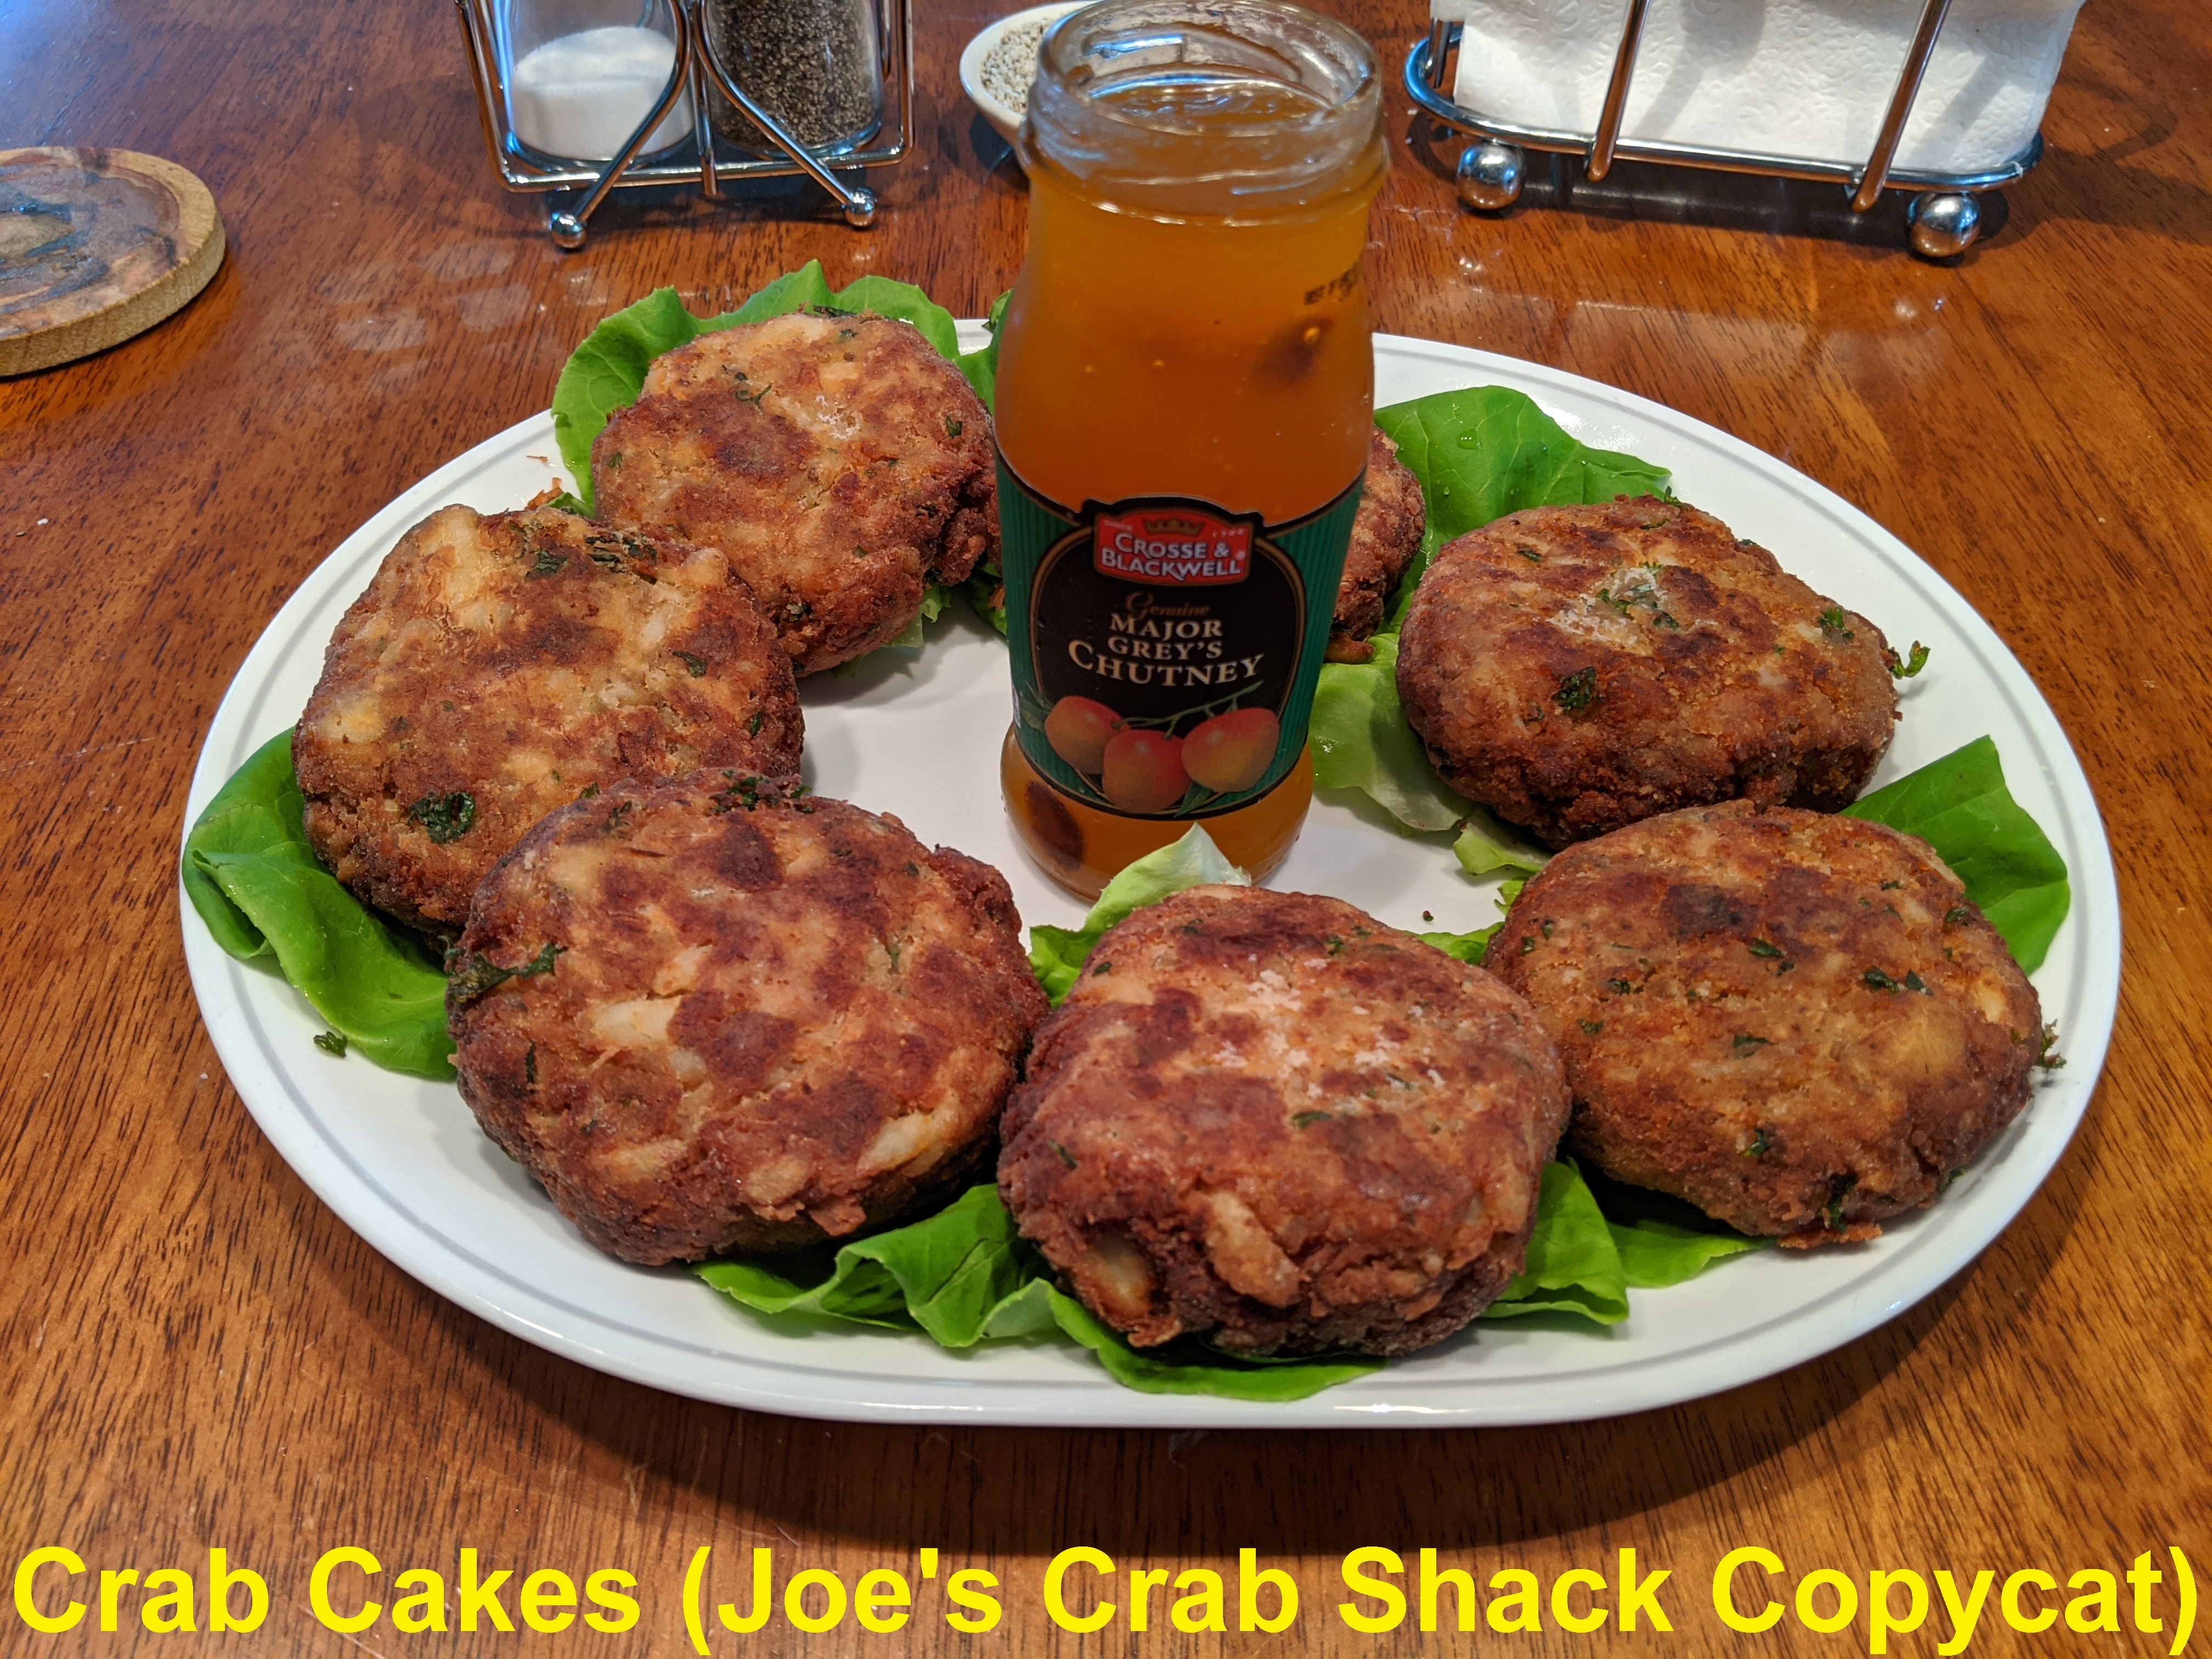 Chef Jimi Penti shares from his recipe collection: Crab Cakes (Joe's Crab Shack Copycat)